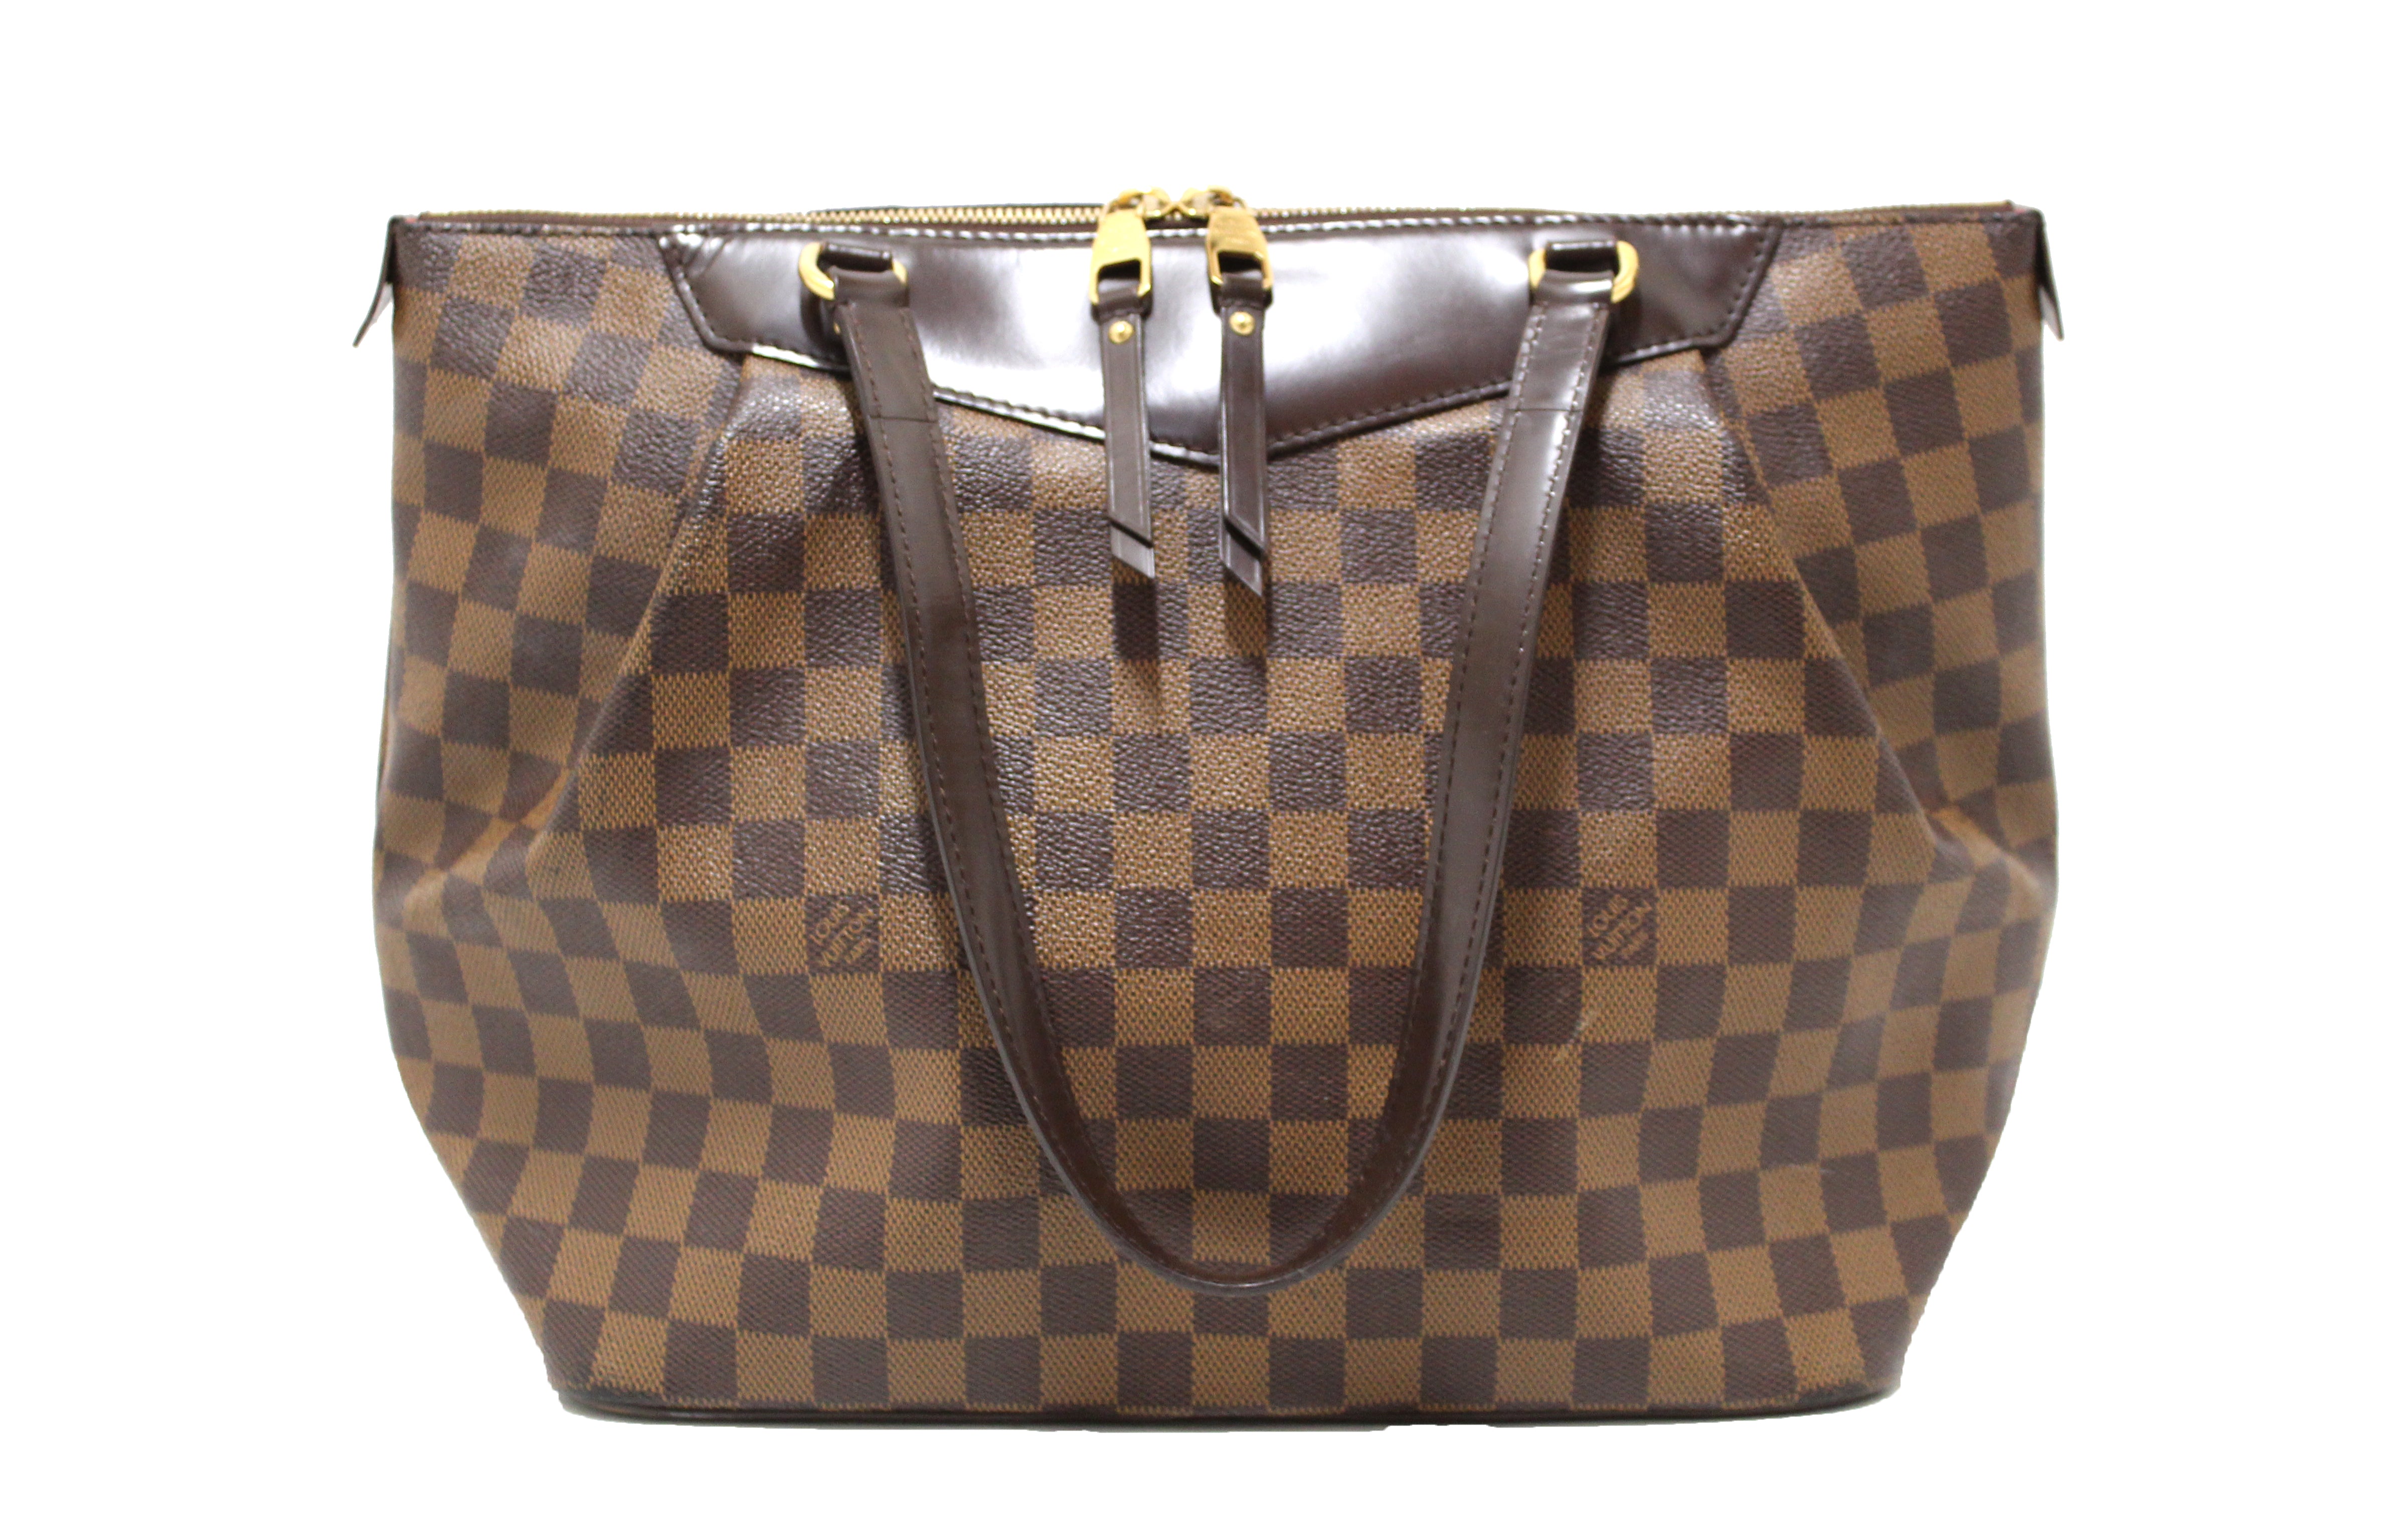 Louis Vuitton Westminster Pm Review